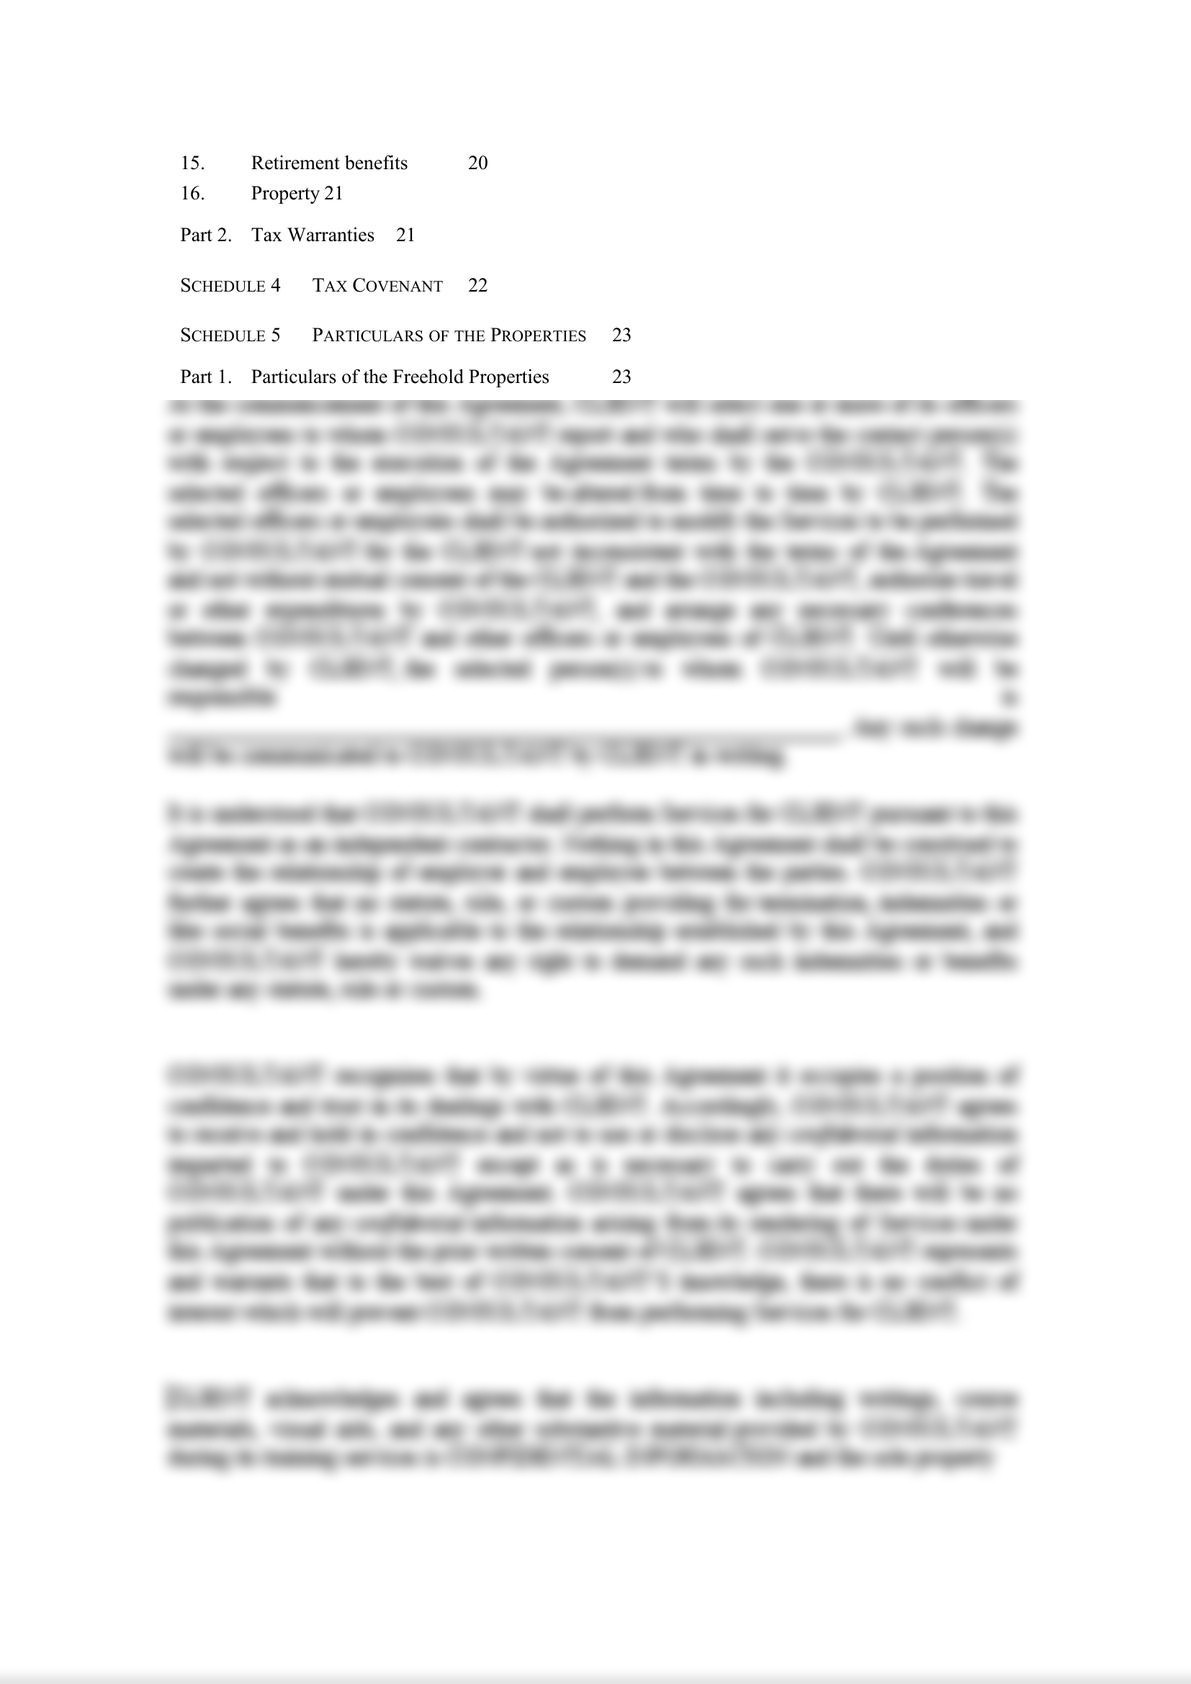 Share Purchase Agreement (M&A)-1